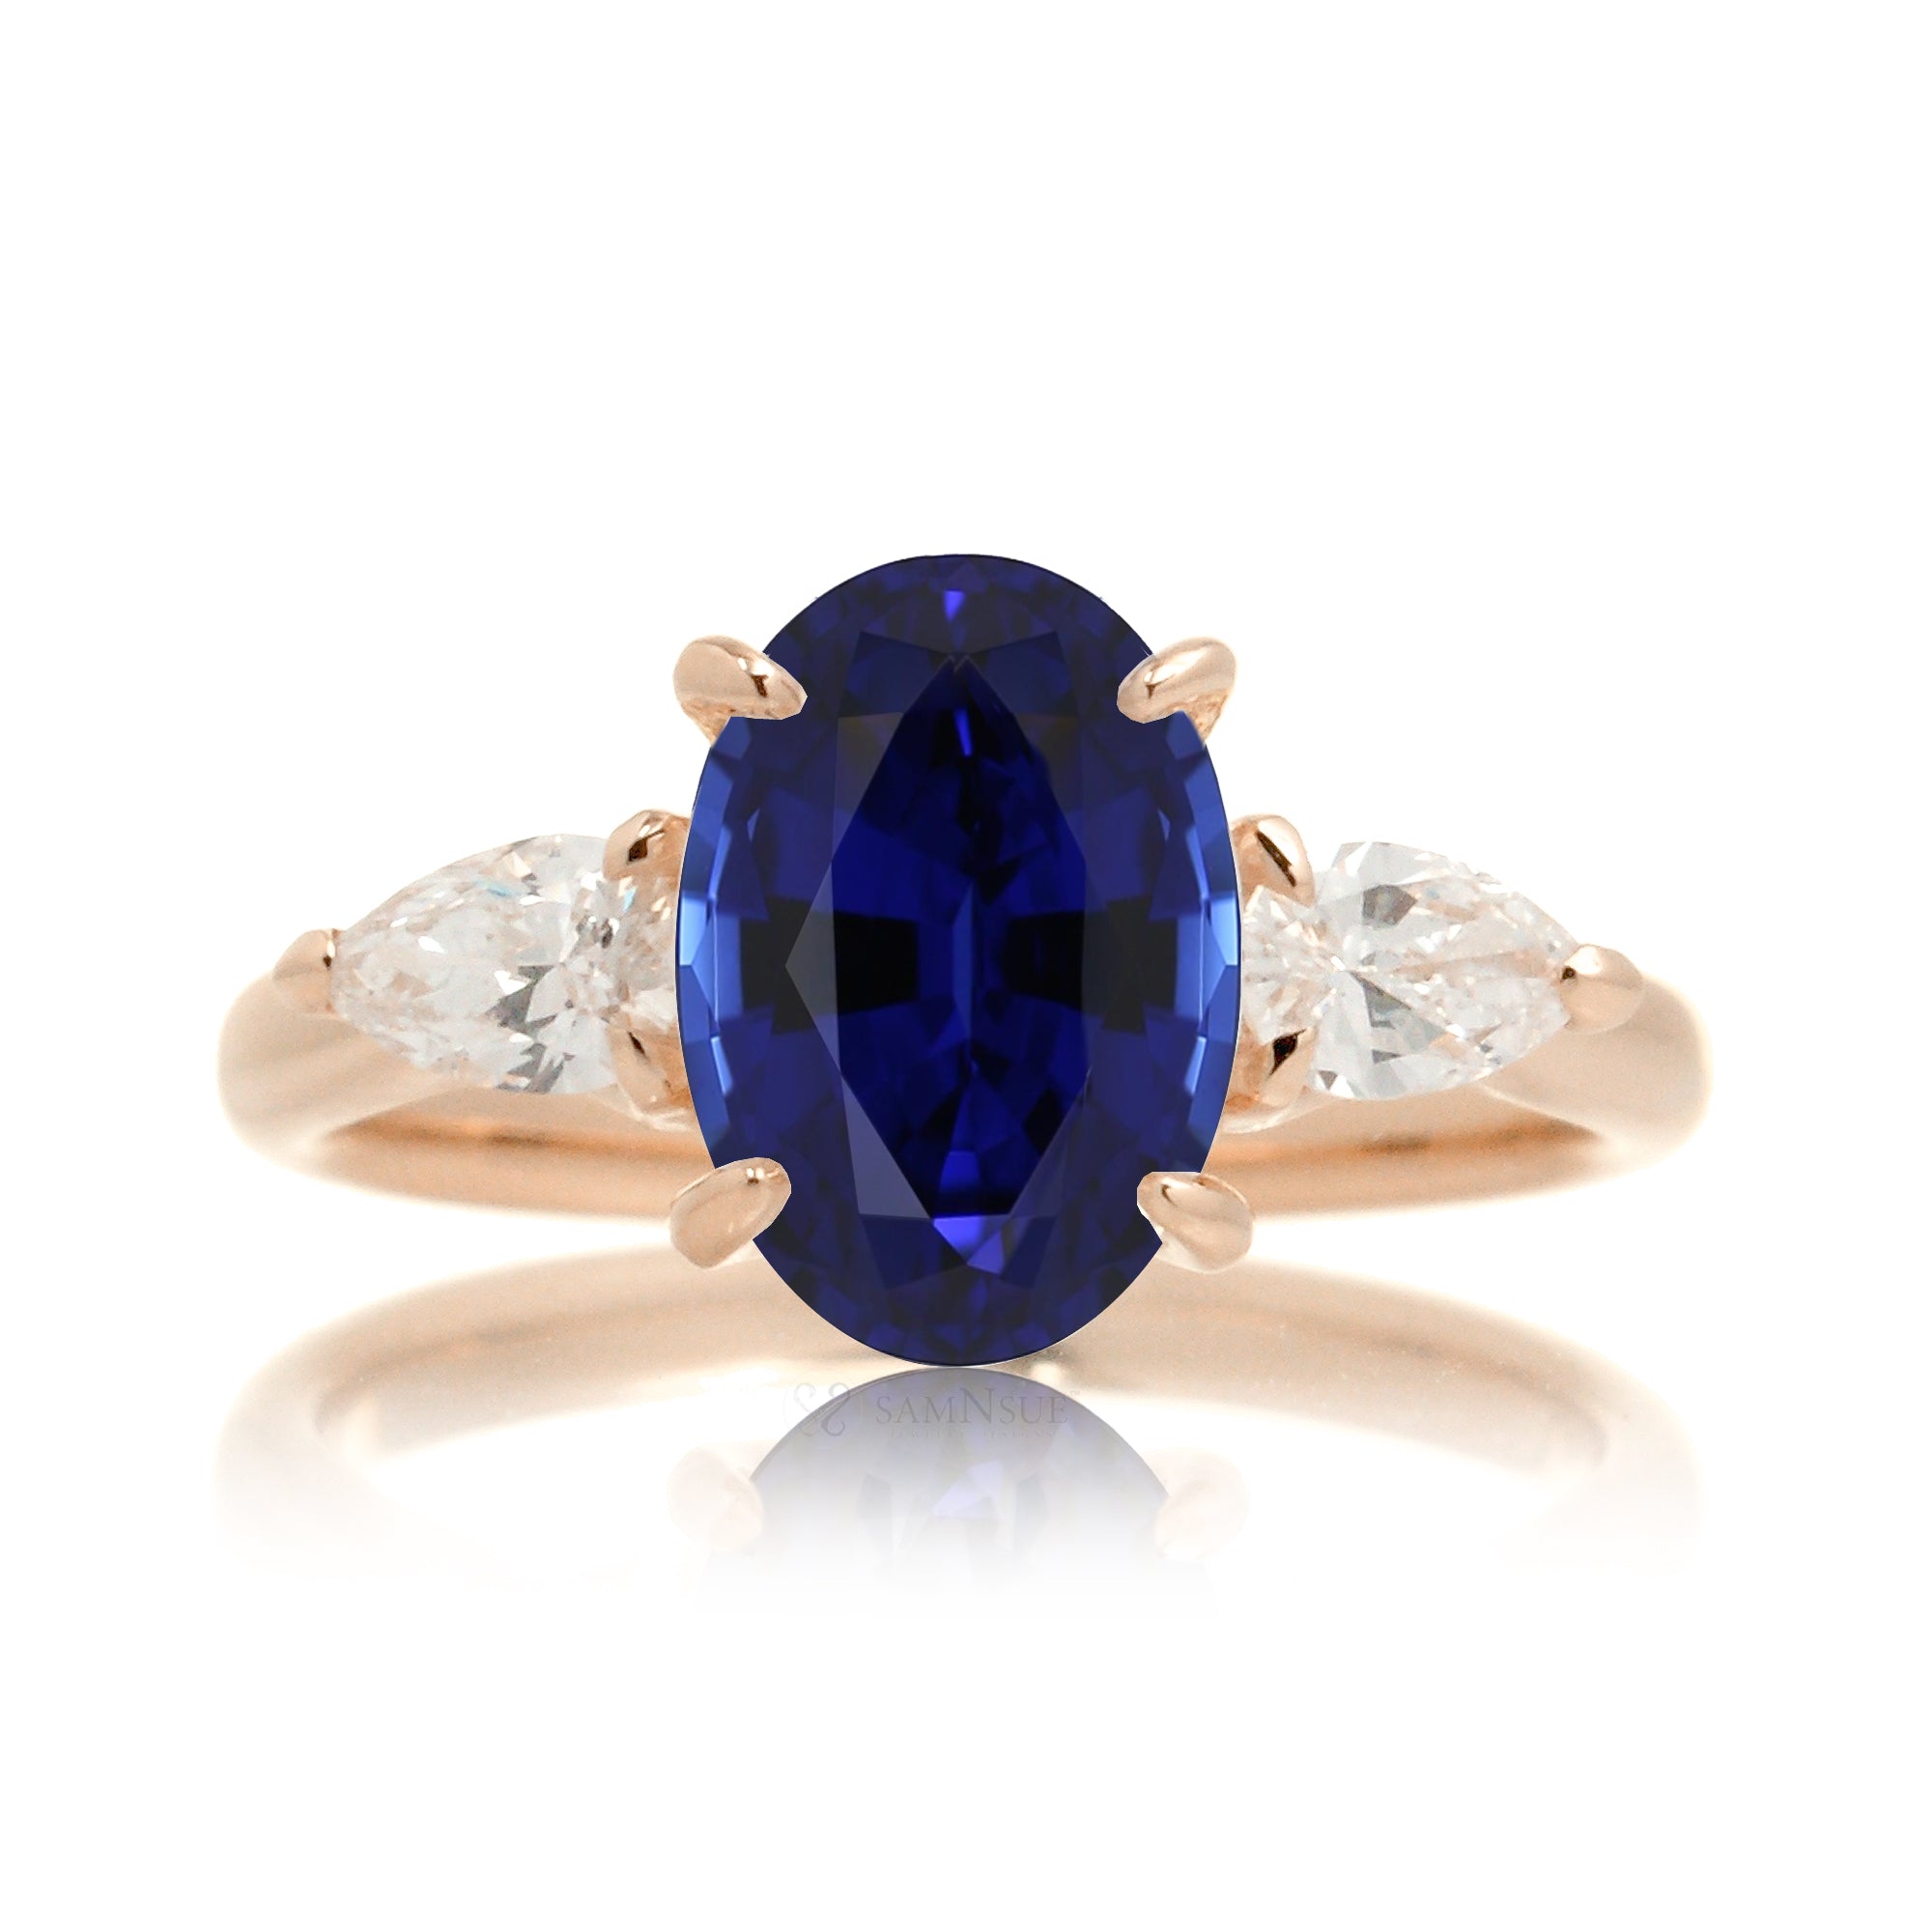 Oval sapphire pear diamond ring rose gold